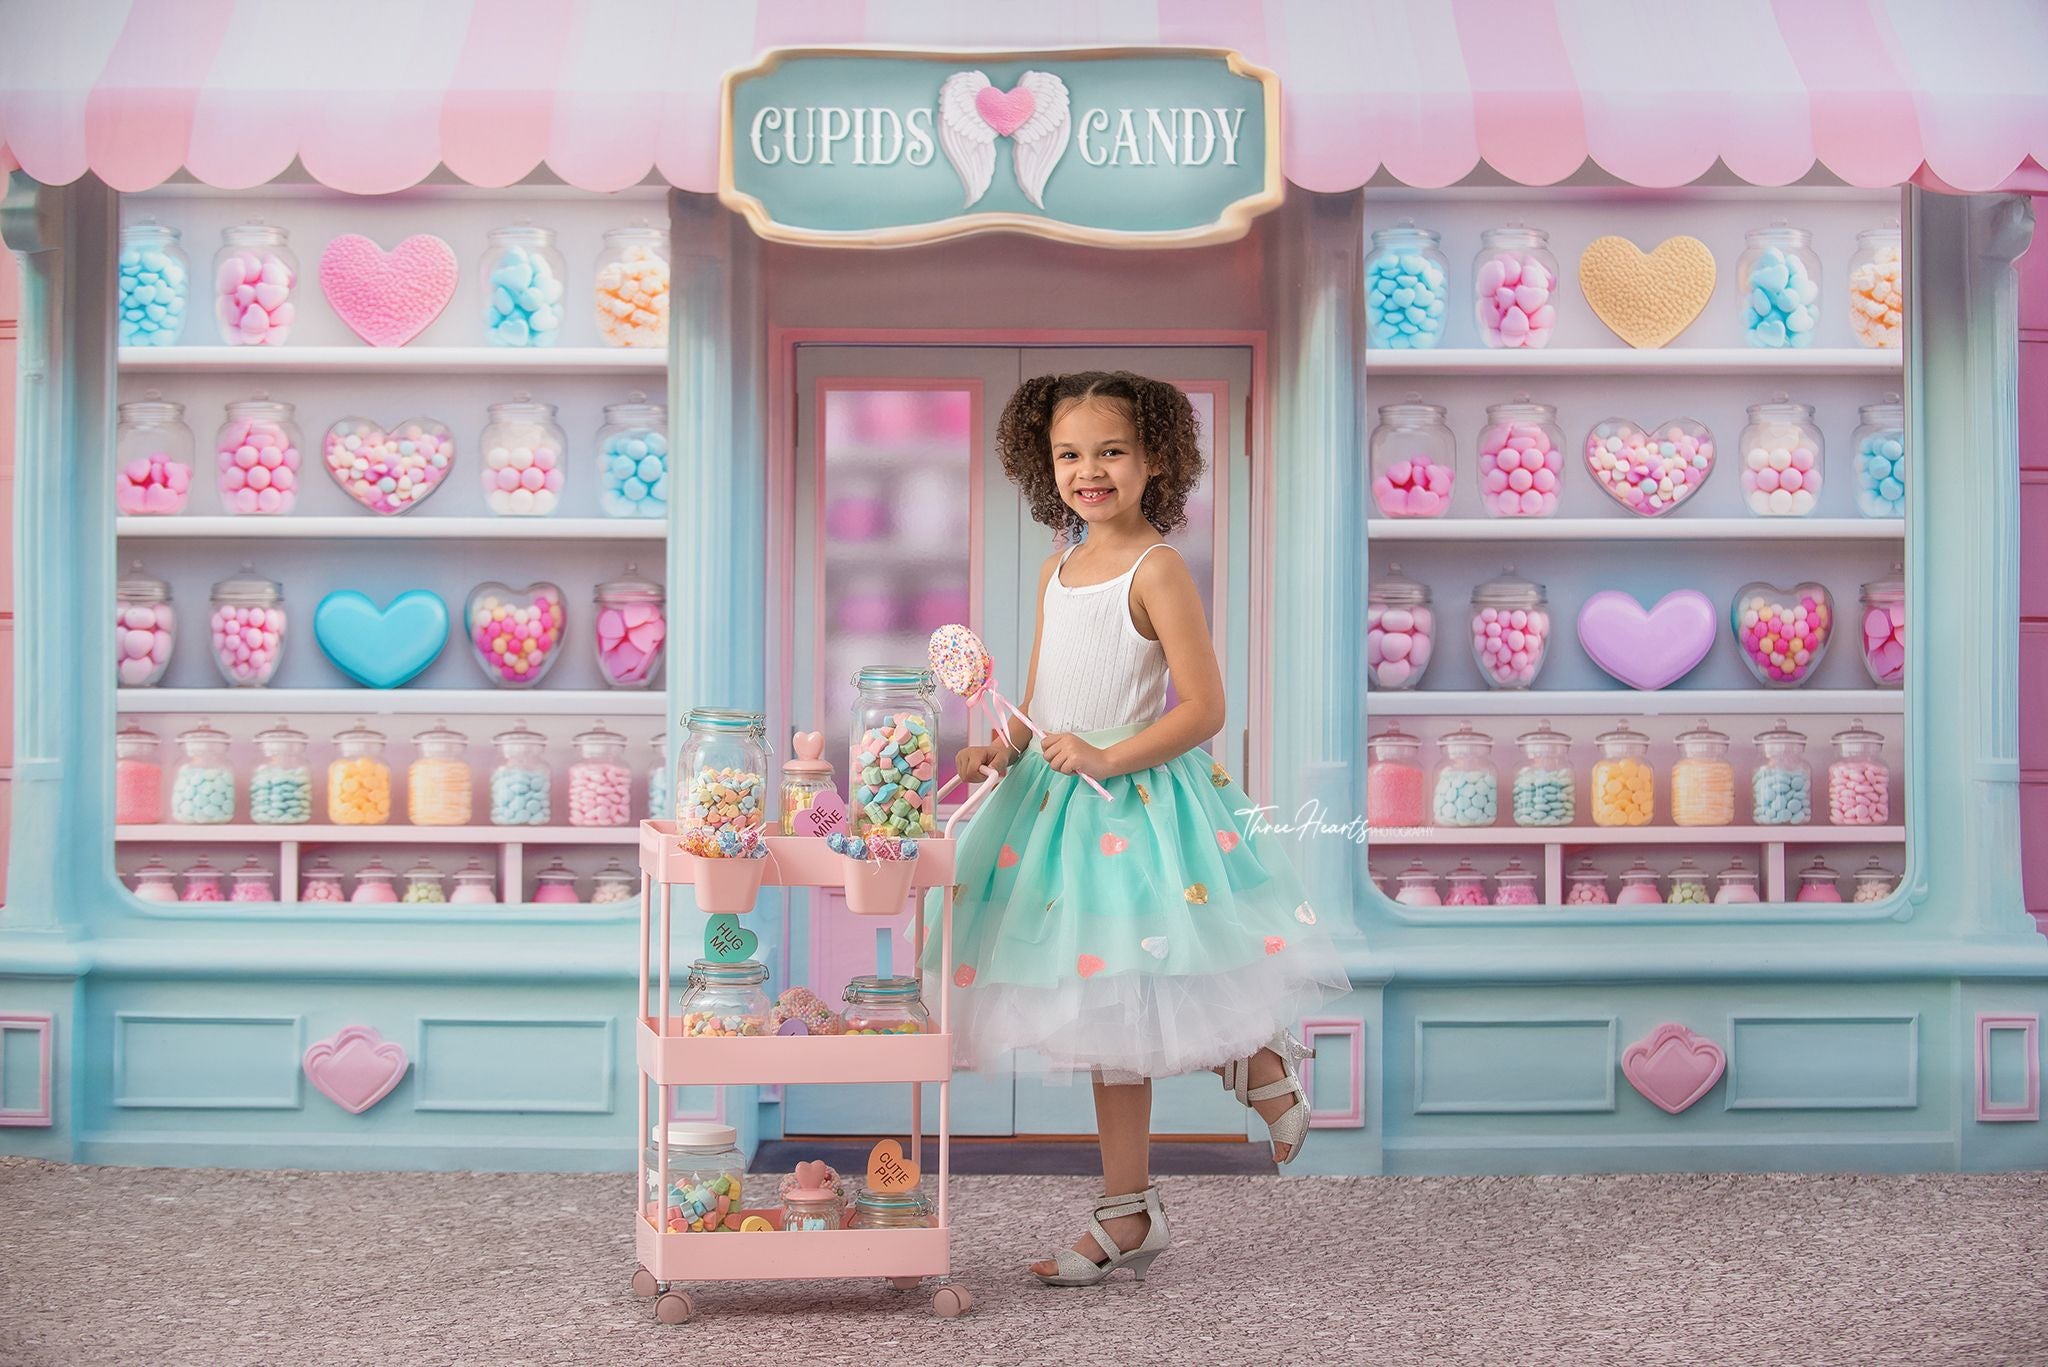 Cupid's Candy Shop Room